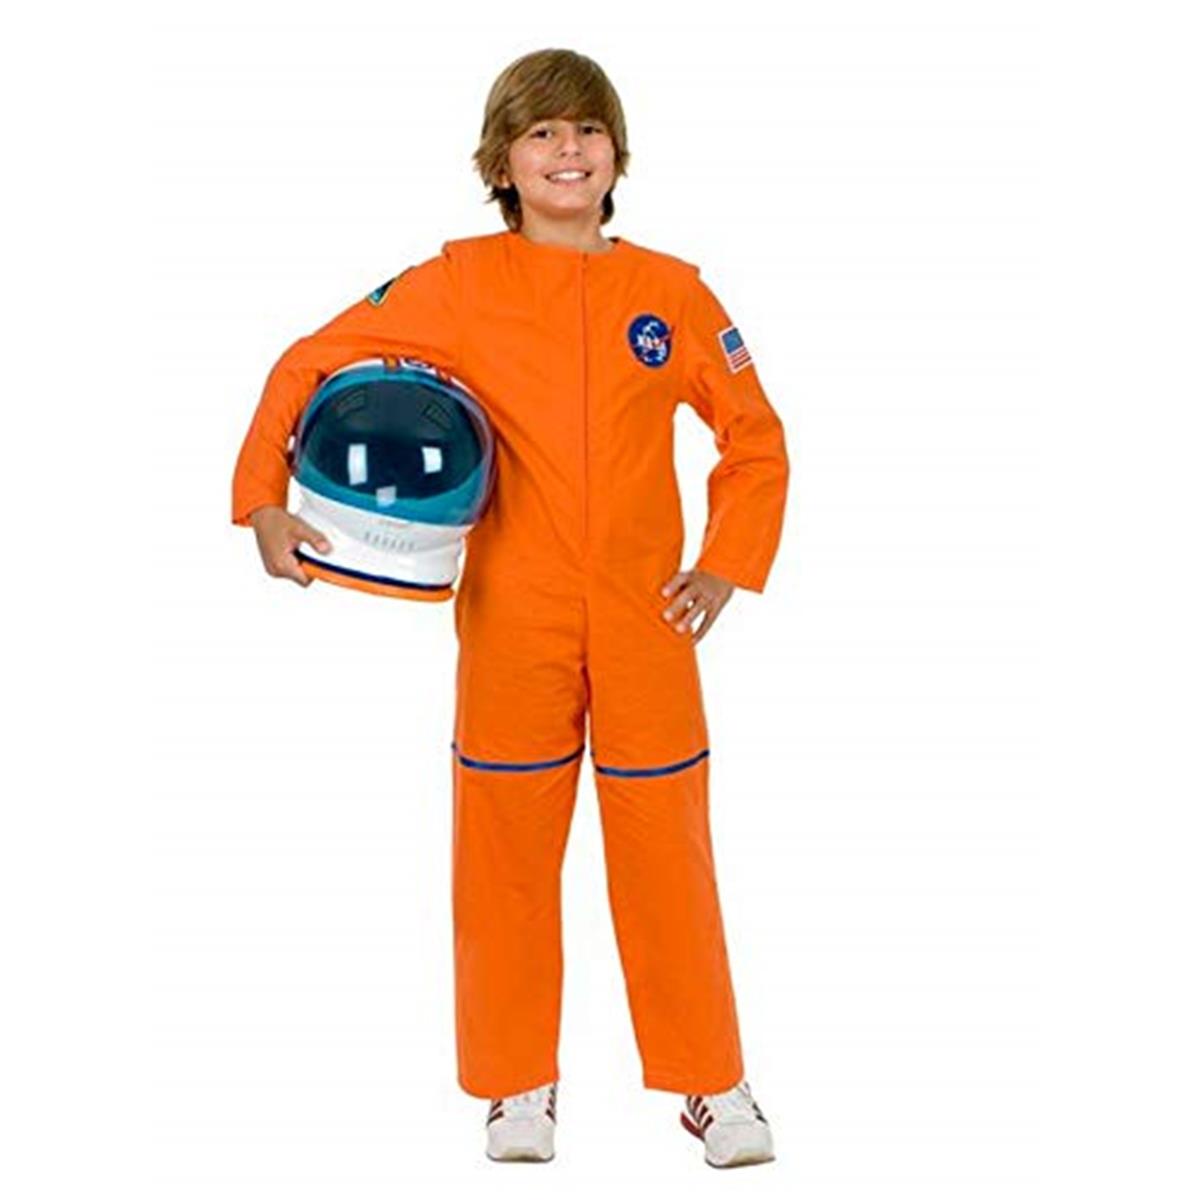 Picture of Charades the Diamond Collection 407960 Boys Astronaut Suit Costume - Medium